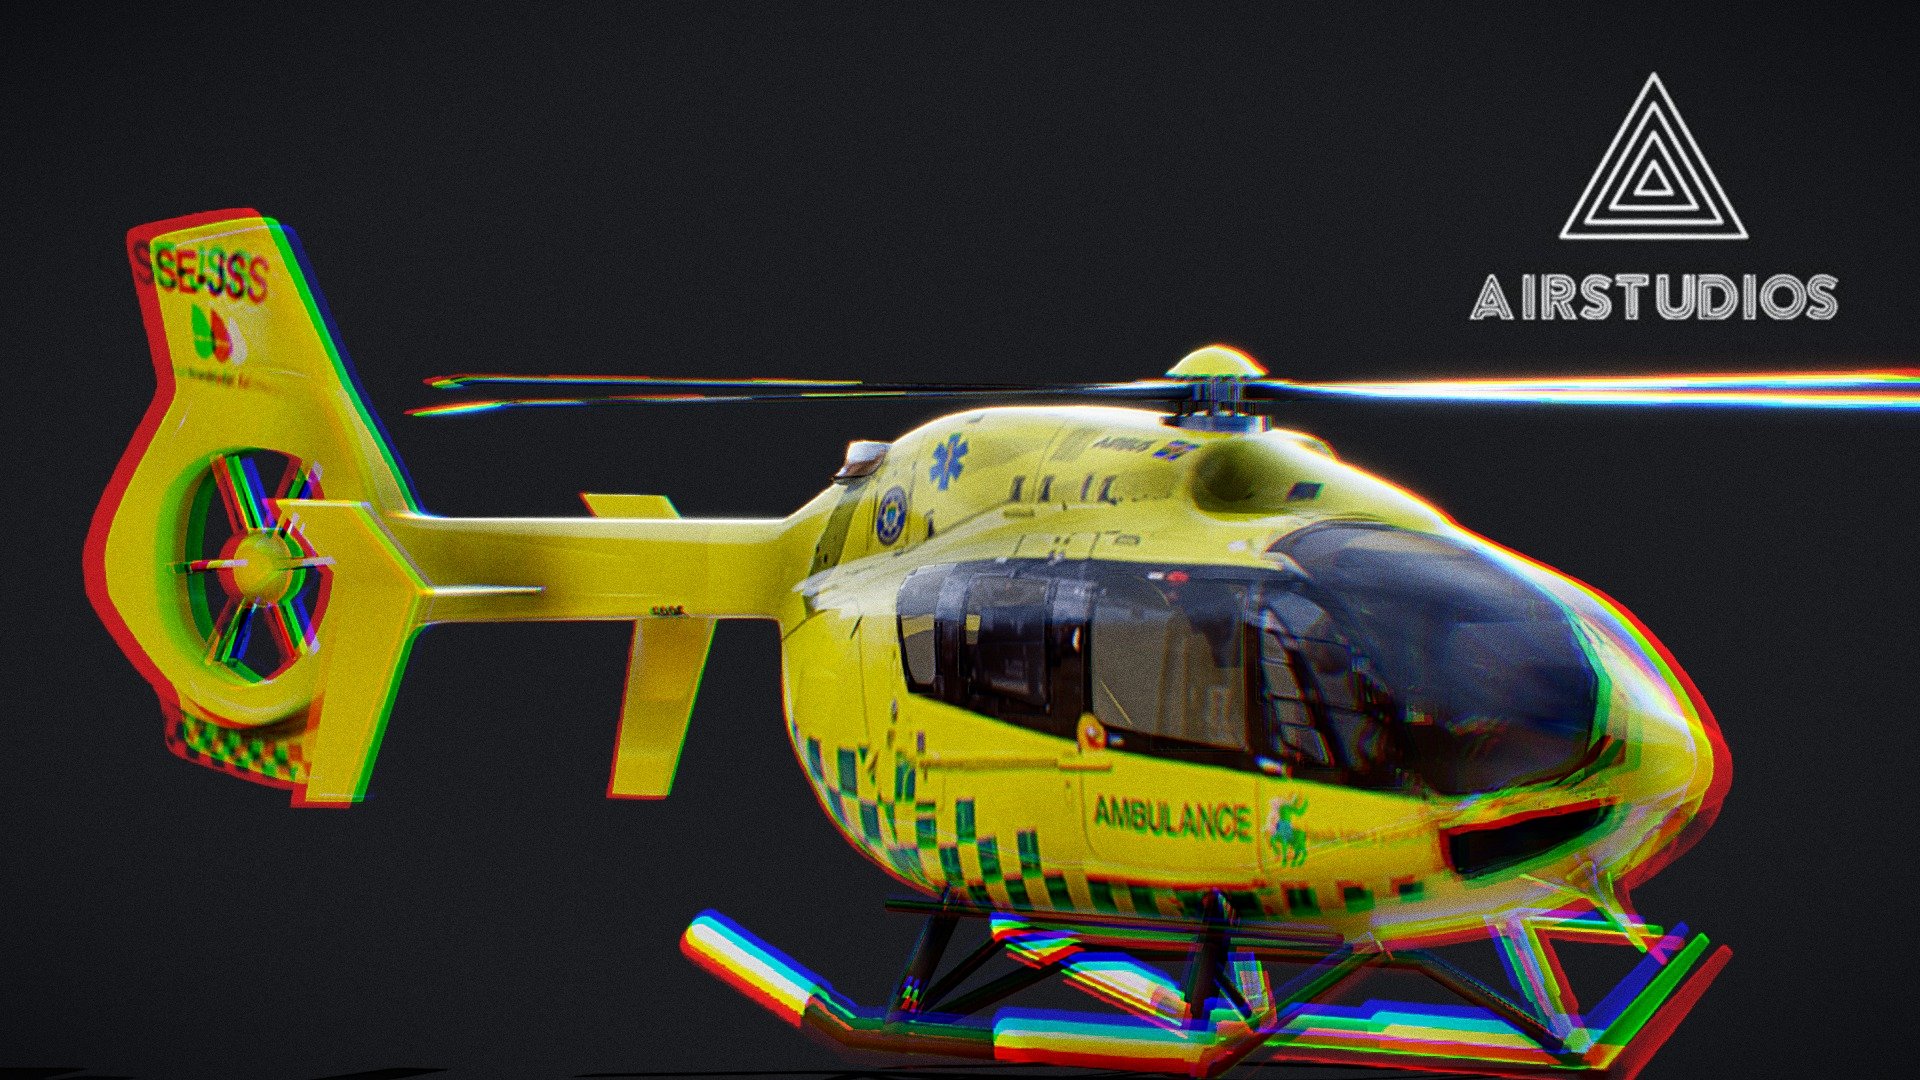 Ambulance Helicopter Airbus h145

Made in Blender - Ambulance Helicopter Airbus h145 (Swedish) - Buy Royalty Free 3D model by AirStudios (@sebbe613) 3d model